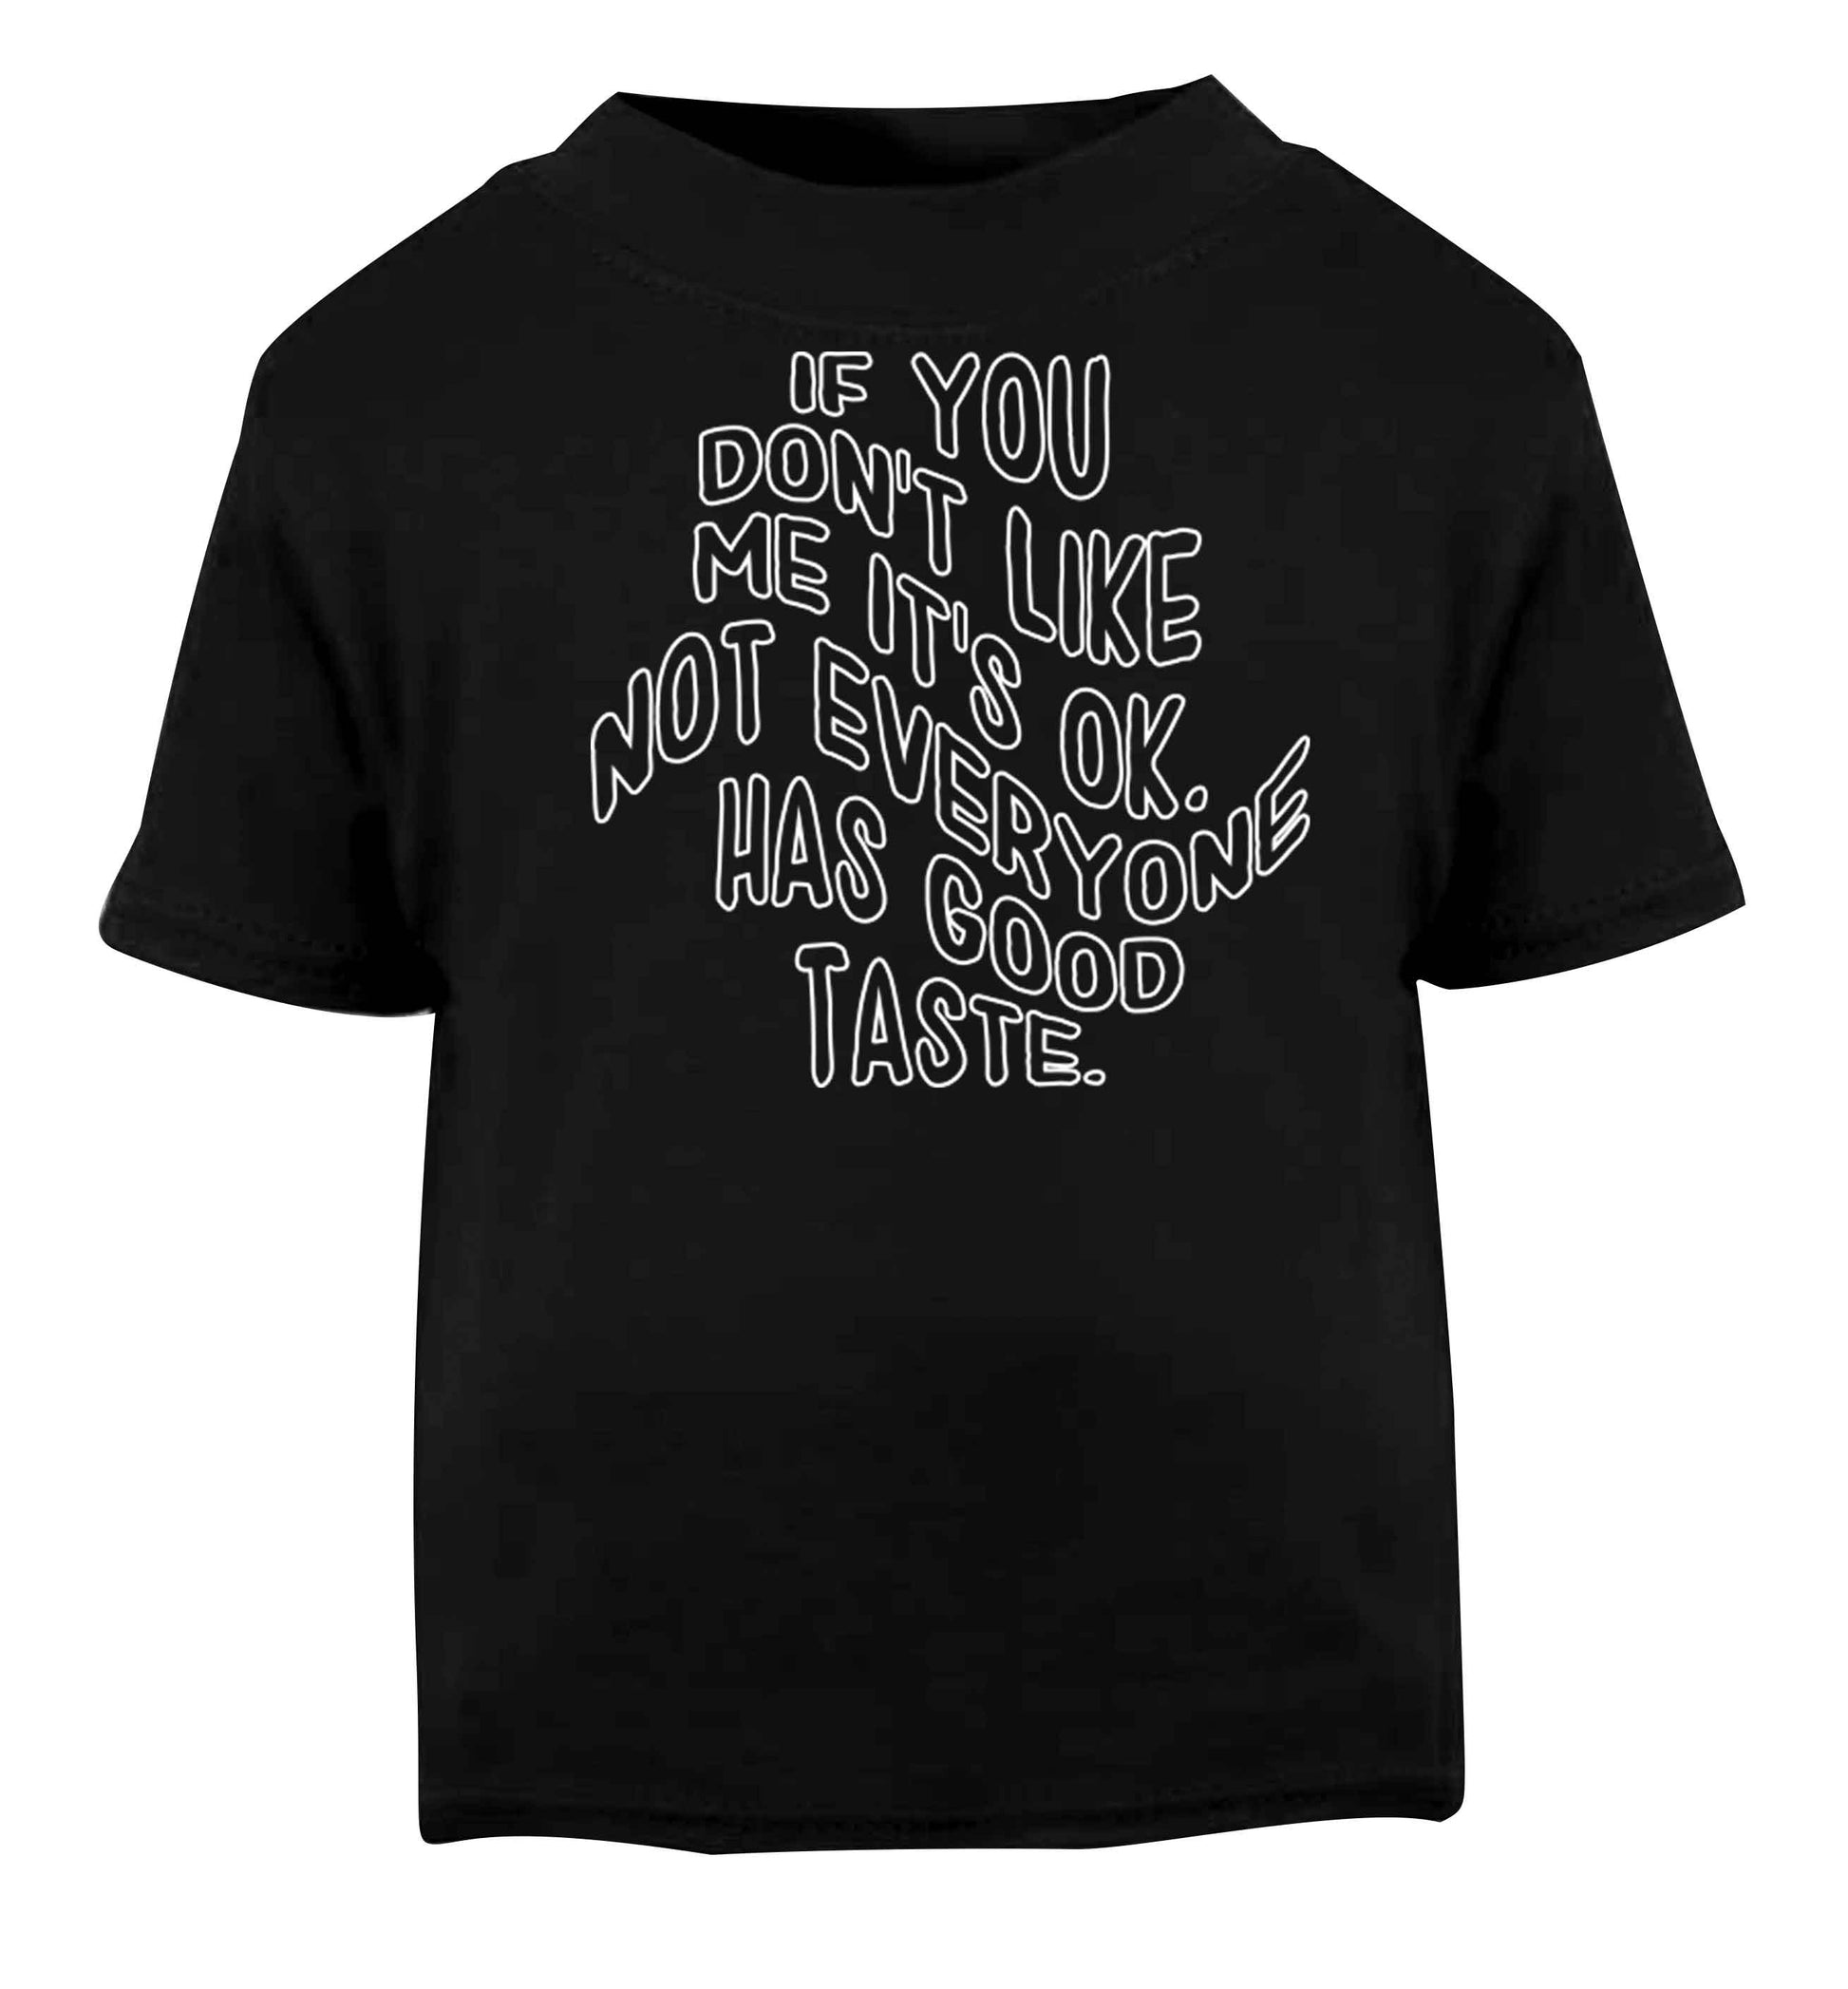 If you don't like me it's ok not everyone has good taste Black baby toddler Tshirt 2 years